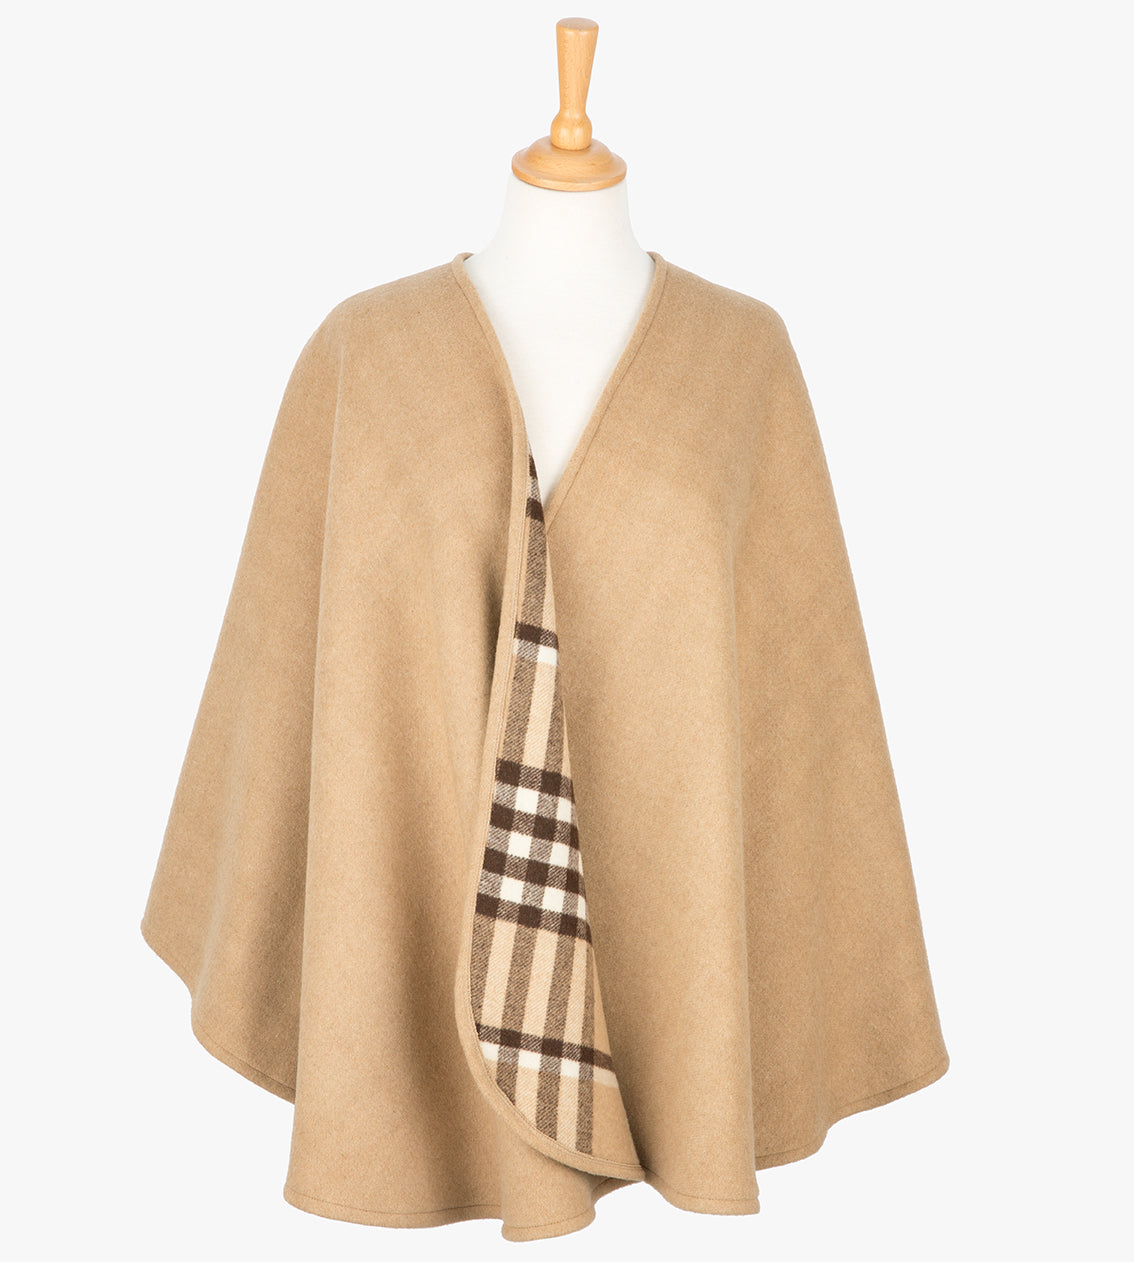 Reversible Wool and Cashmere serape/wrap in camel, it is camel on one side and a brown check on the reverse as shown.